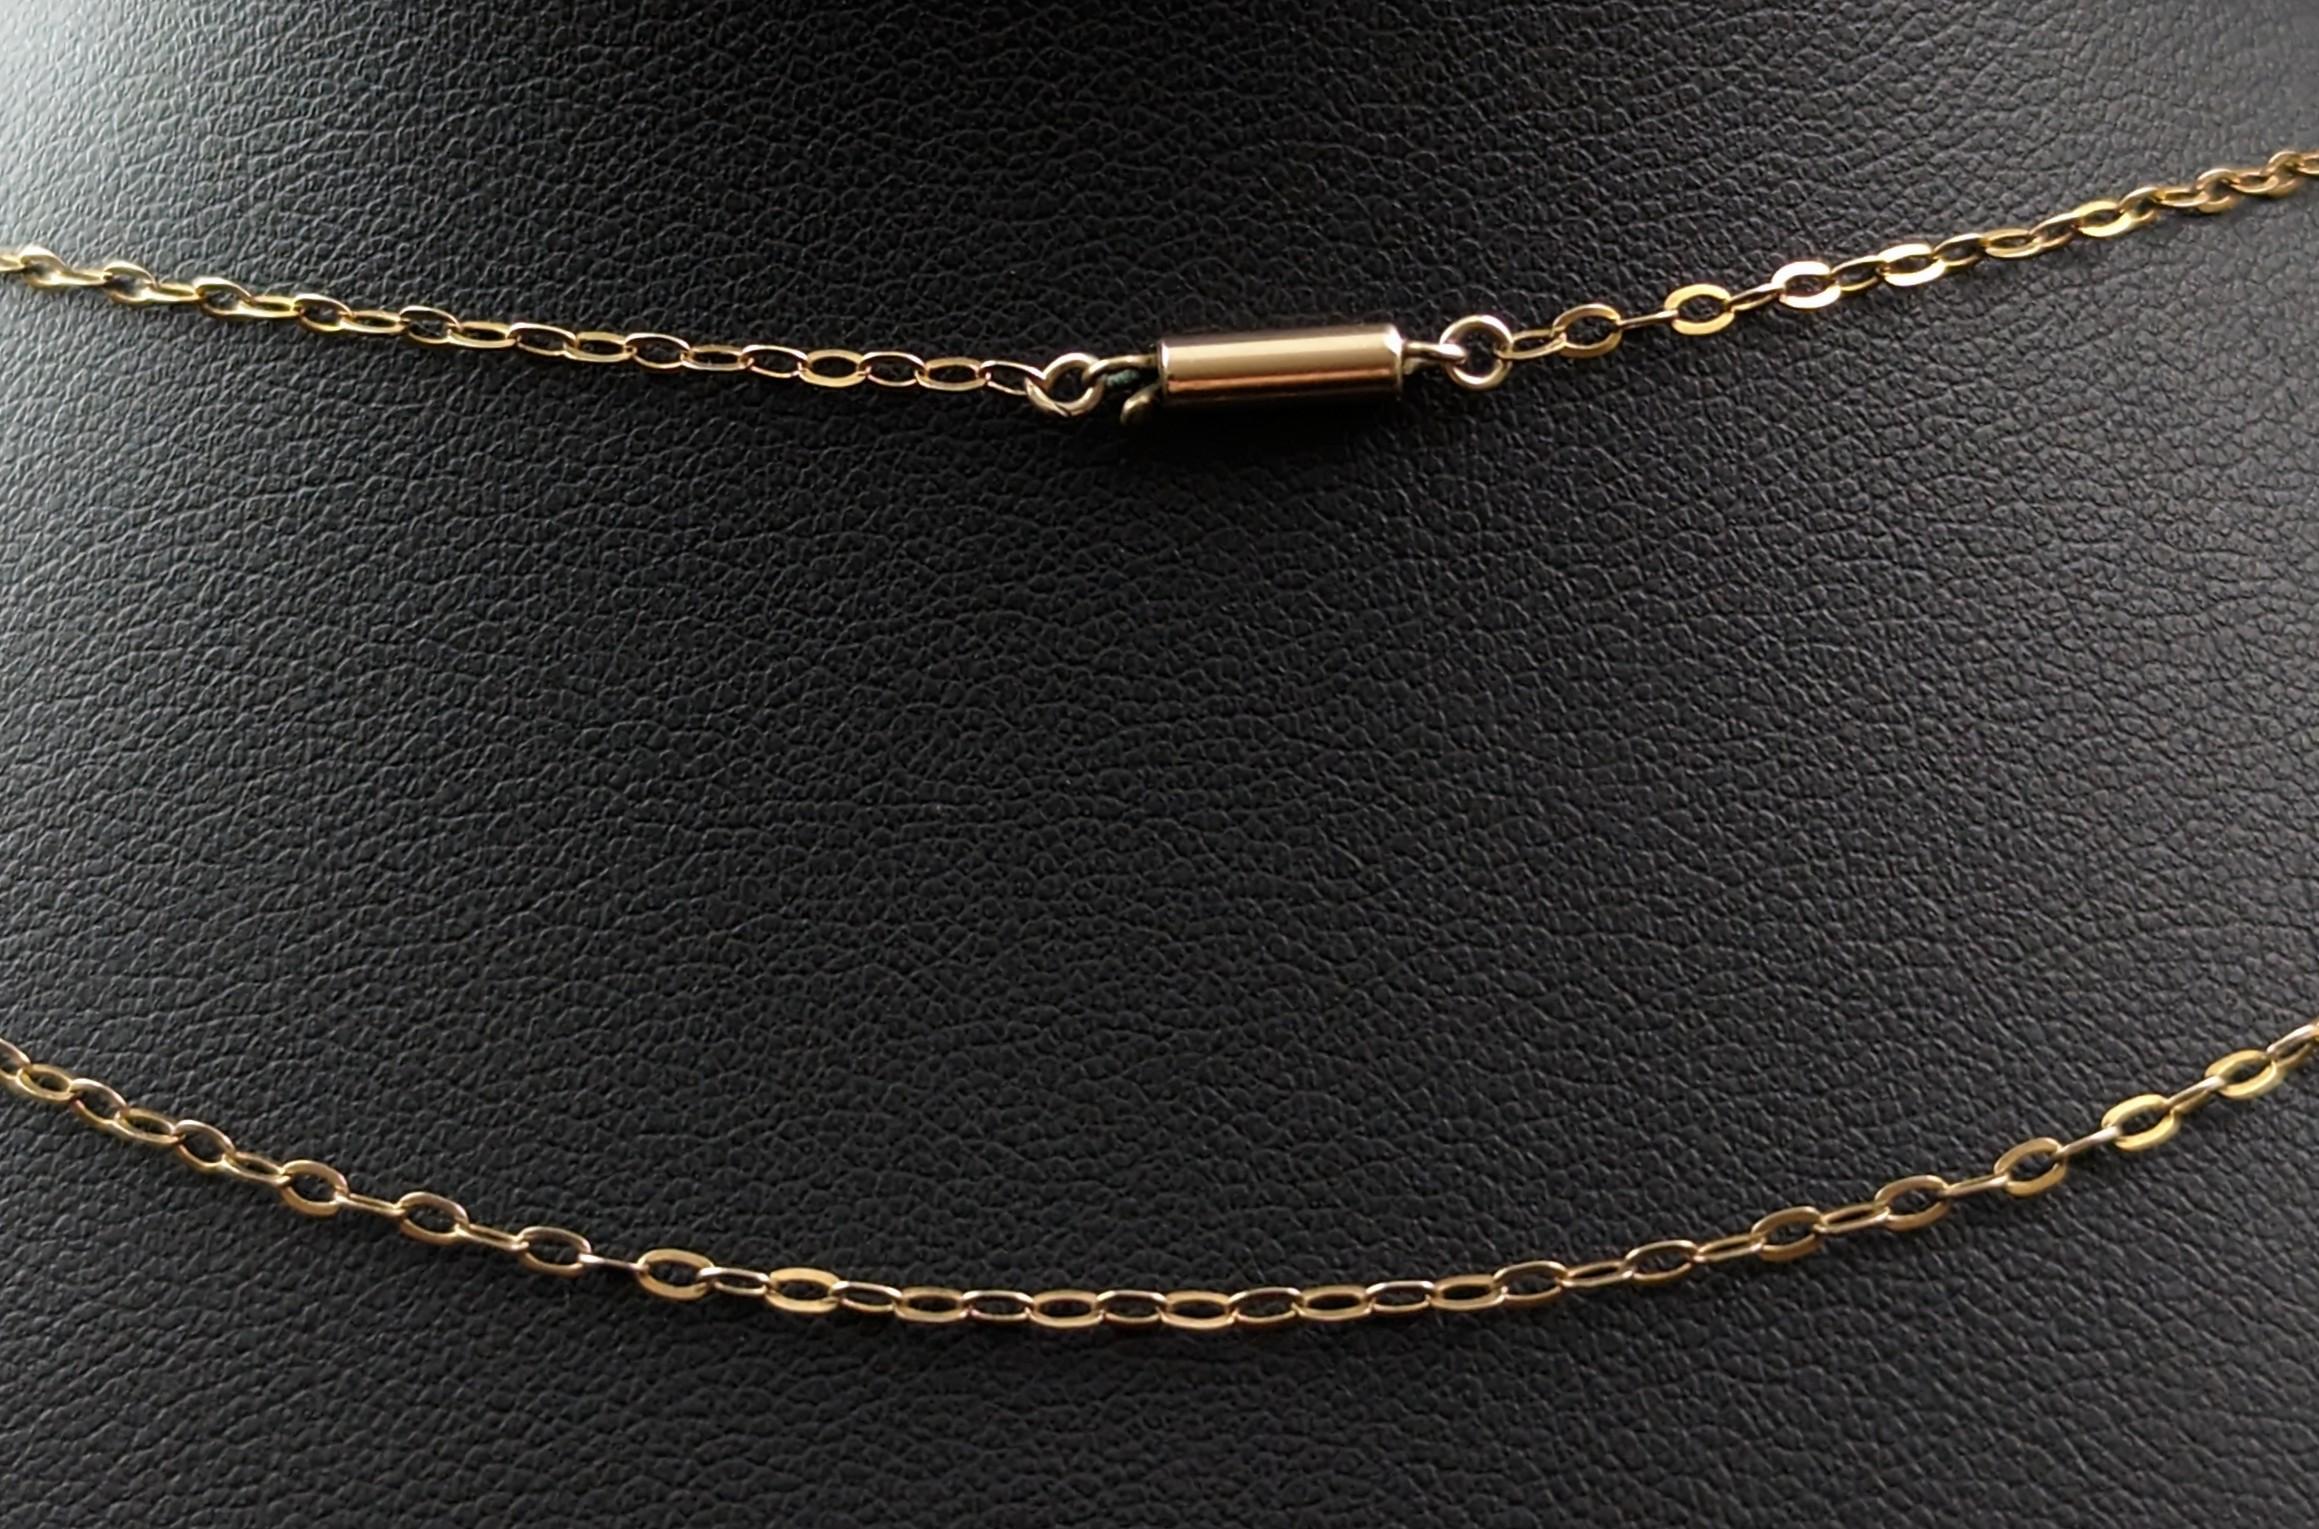 Antique 9k yellow gold trace chain necklace, dainty  7